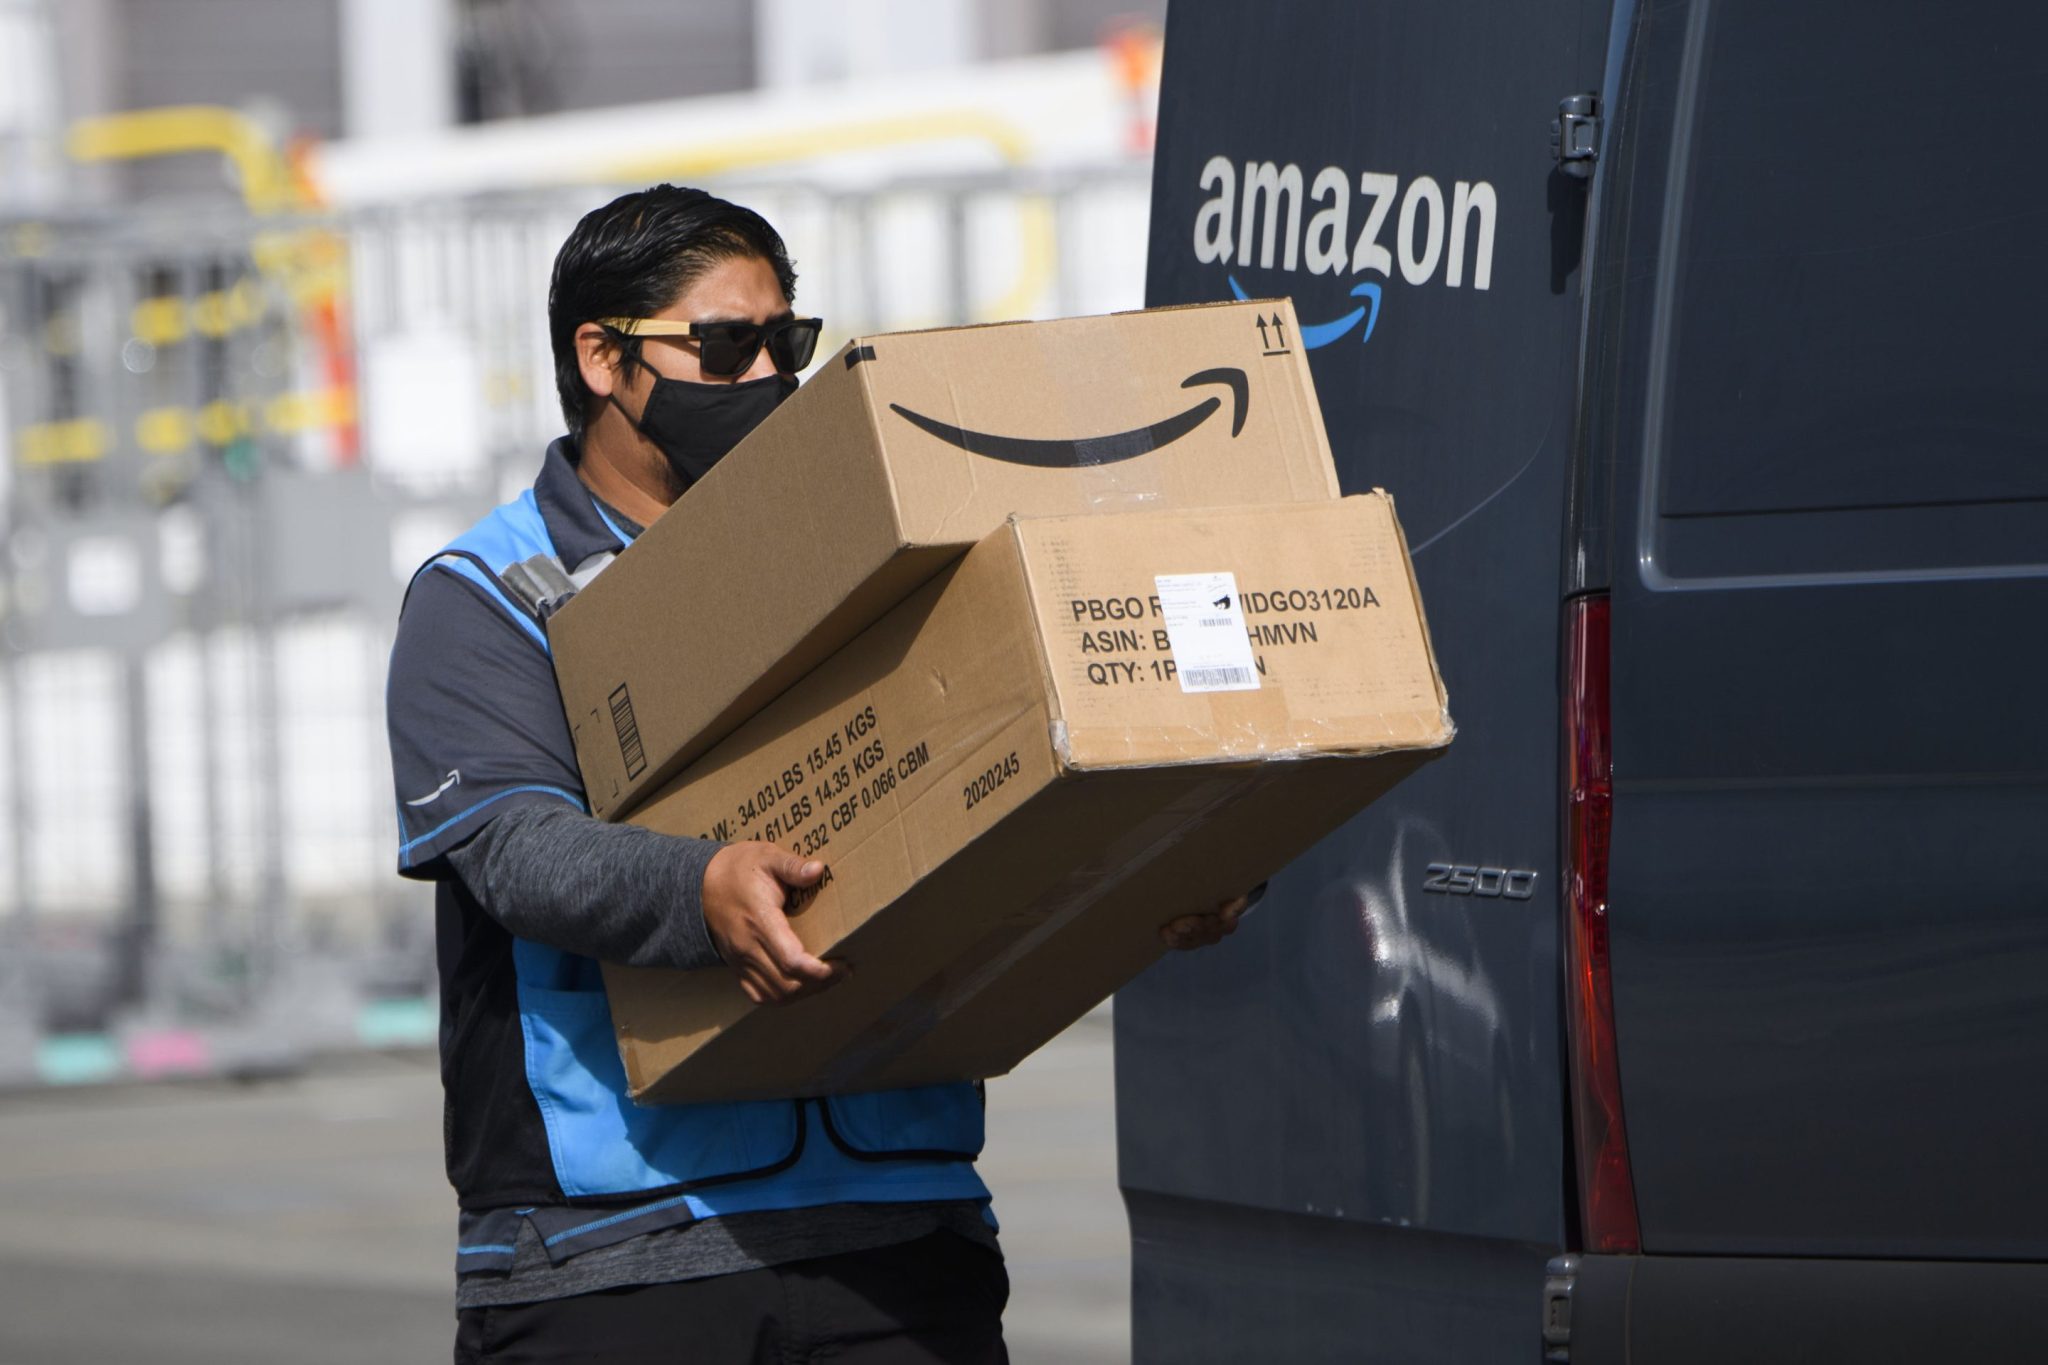 Amazon delivers more packages than UPS or FedEx every year